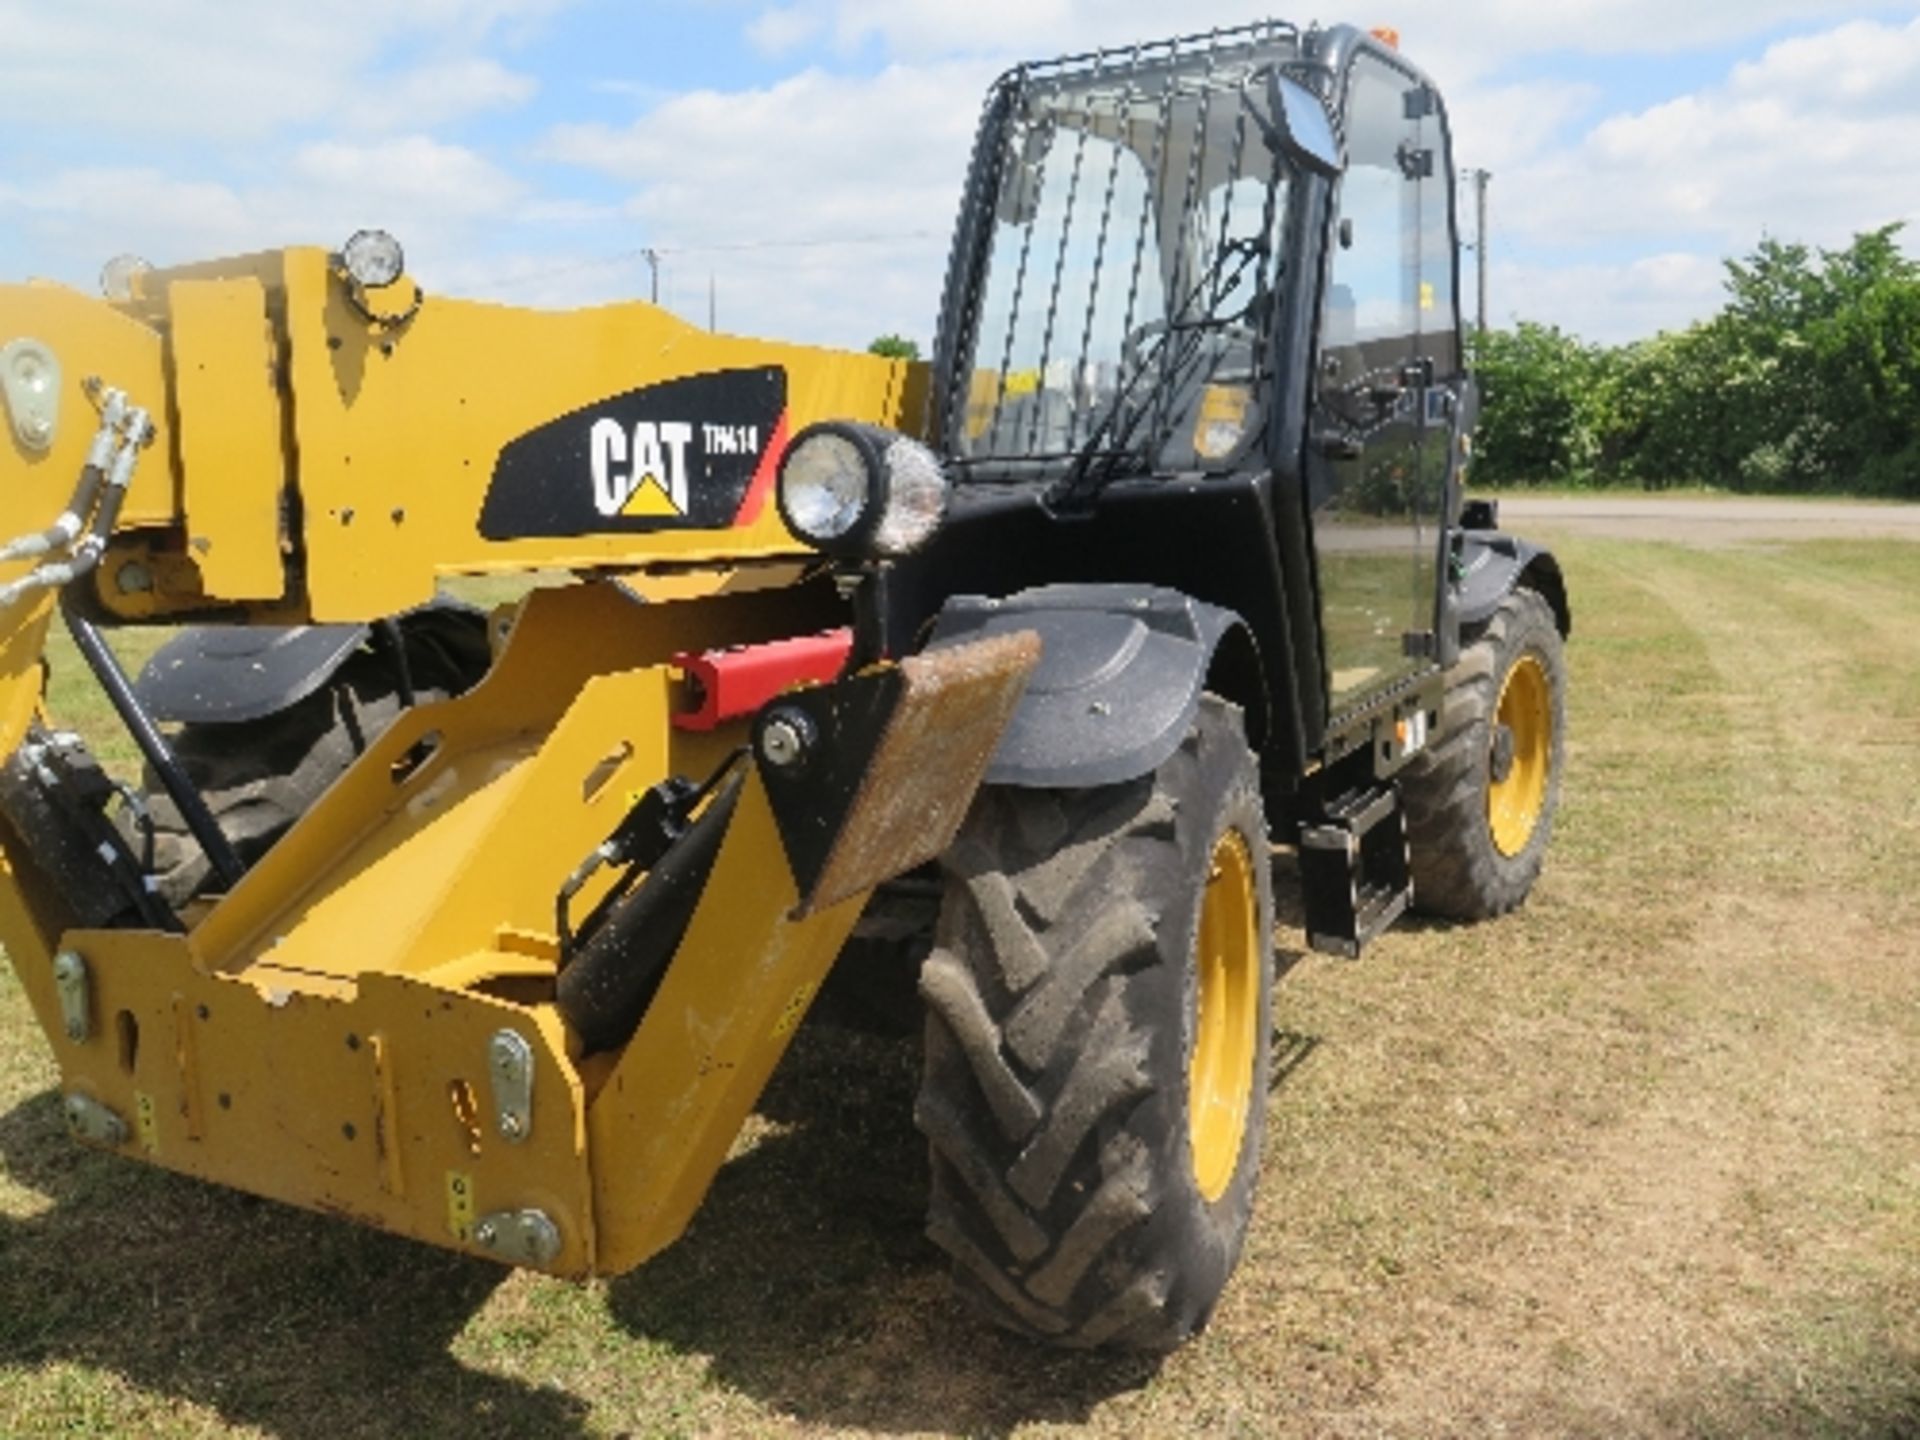 Caterpillar TH414STD telehandler 2480 hrs 2011 TBZ00699
This lot is included by kind permission - Image 6 of 7